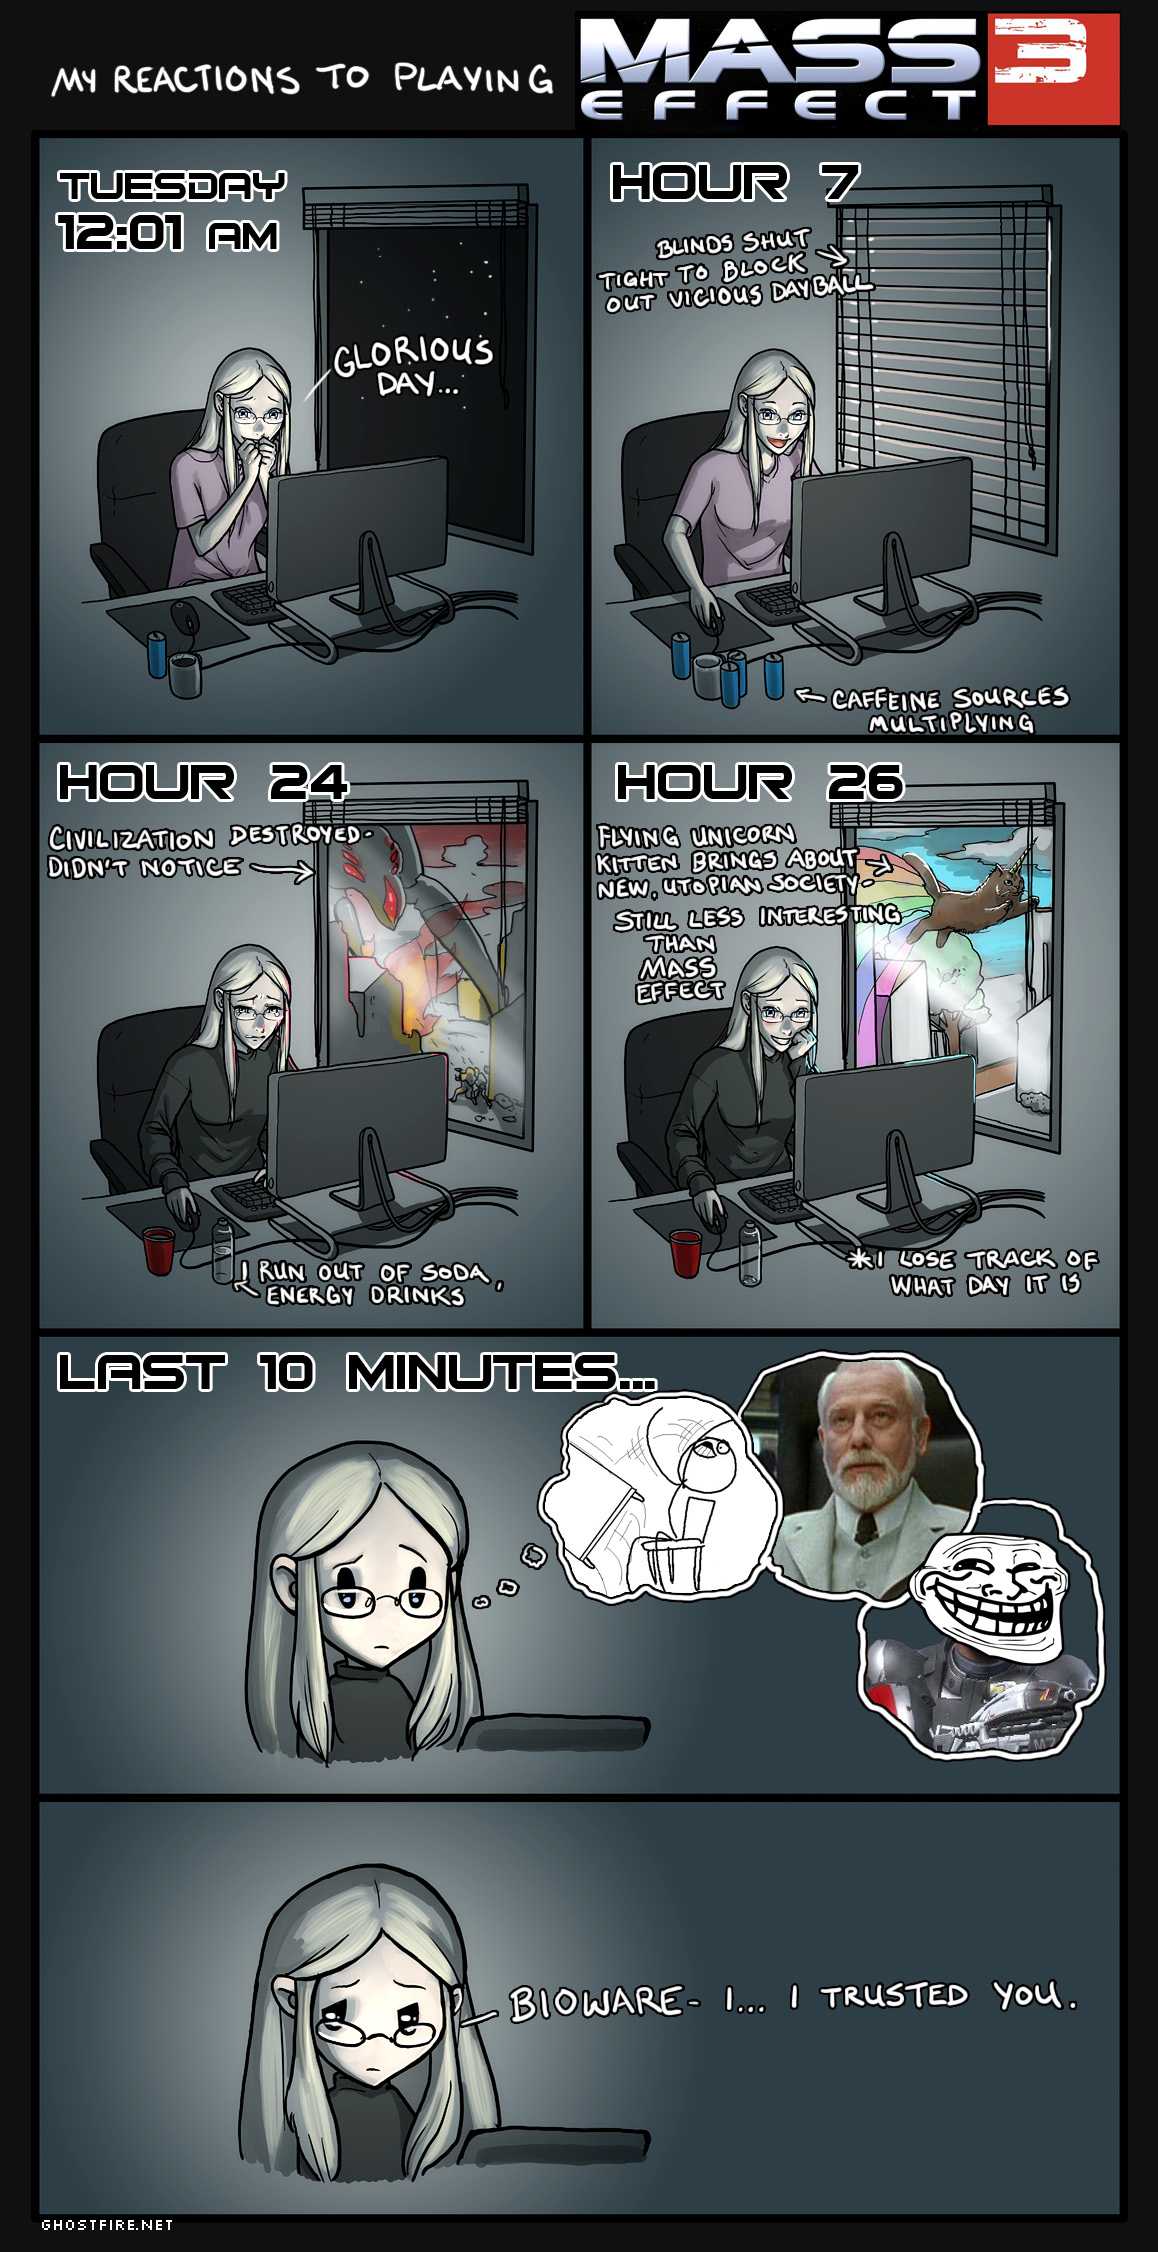 mass_effect_3_reactions__non_spoilery__by_ghostfire-d4sip1q.jpg